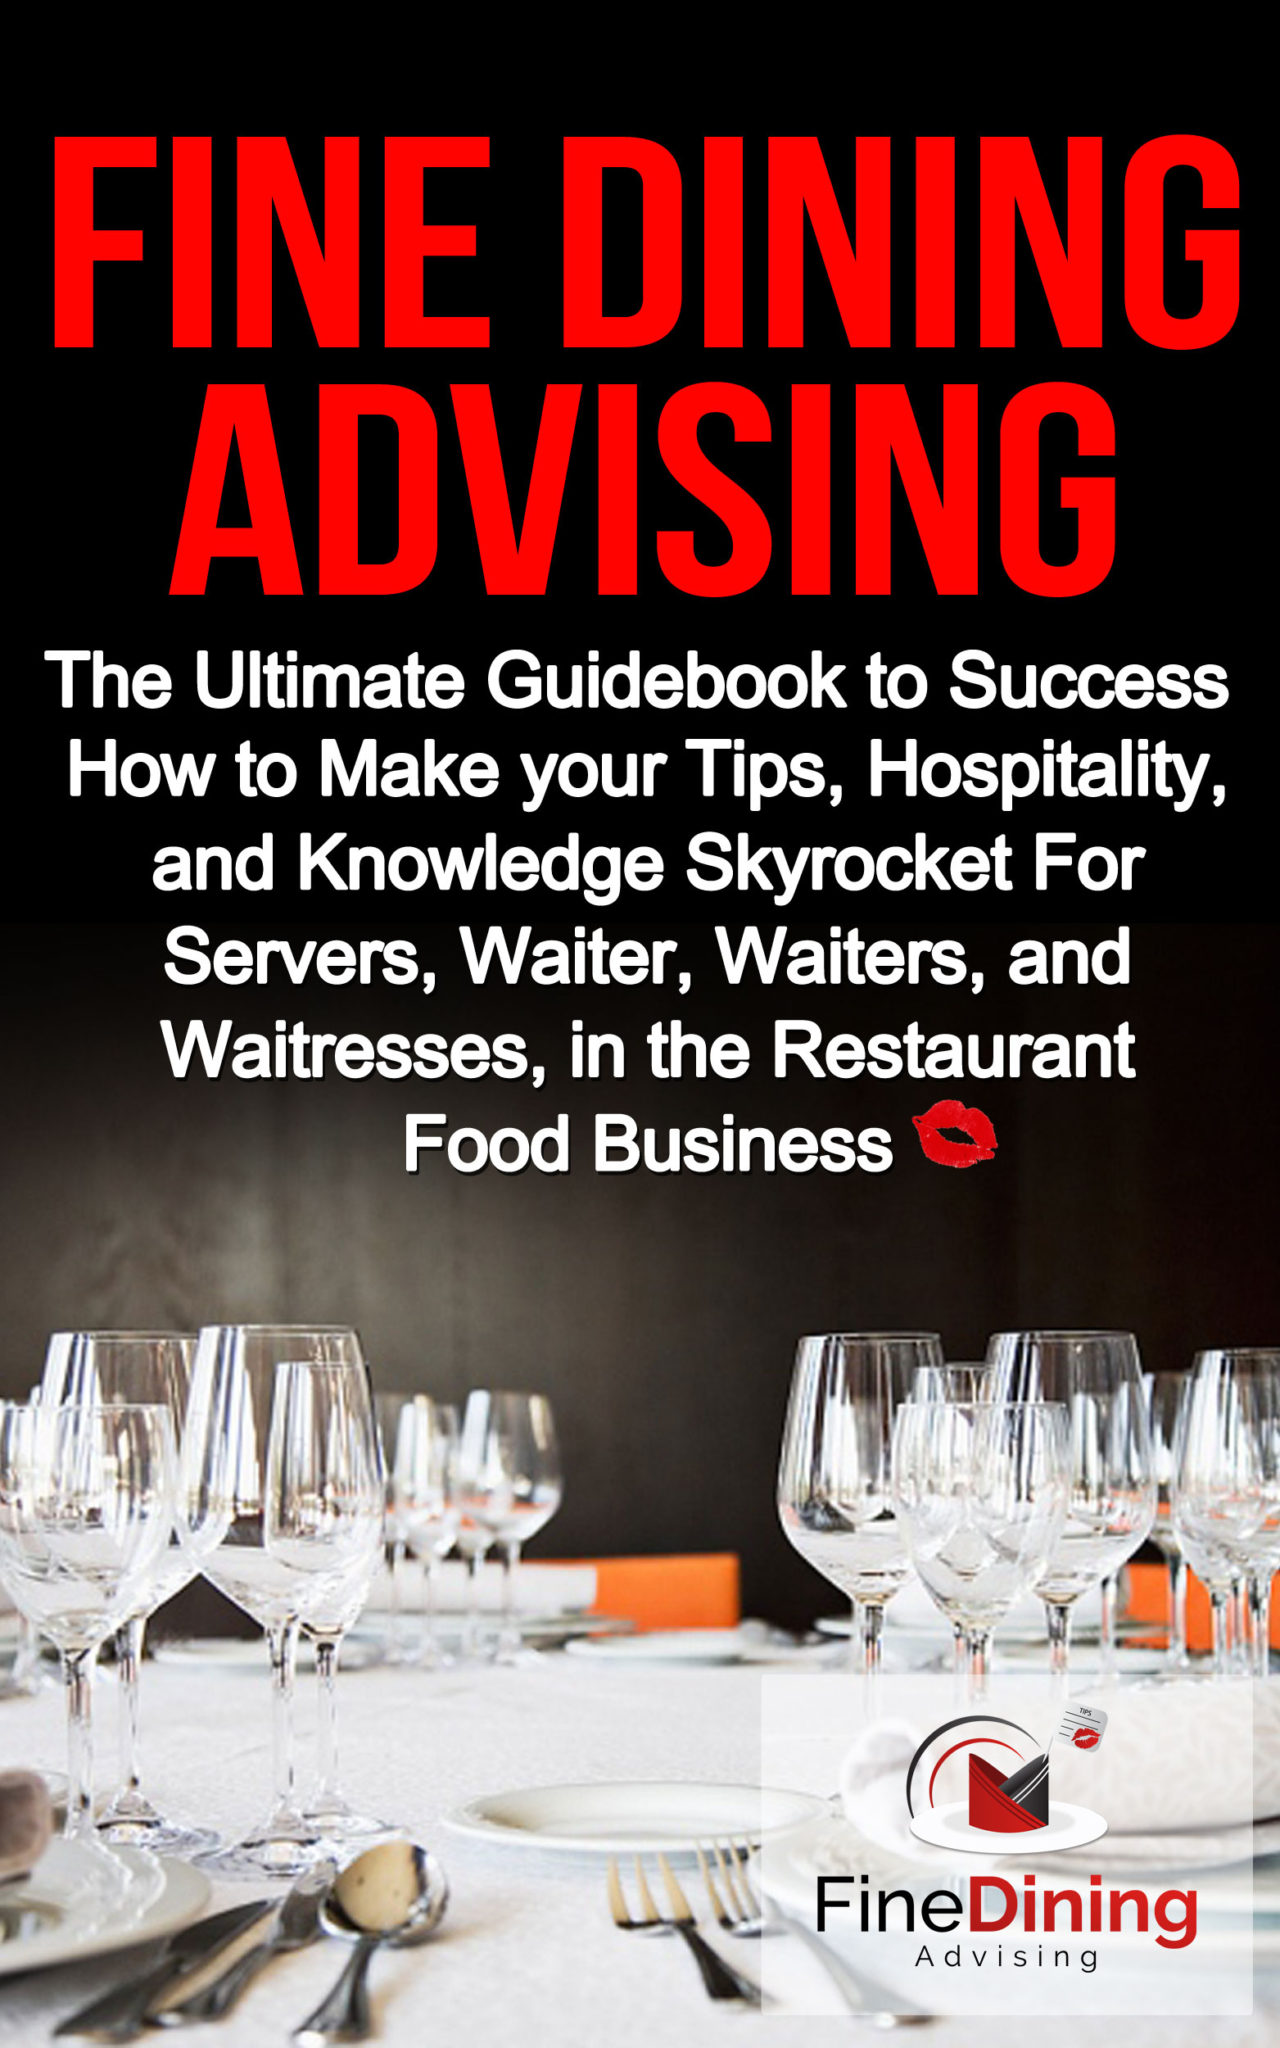 FREE: Fine Dining Advising: The Ultimate Guidebook to Success – How to Make your Tips, Hospitality, and Knowledge Skyrocket For Servers, Waiter, Waiters, and Waitresses, in the Restaurant Food Business by Franky Surroca